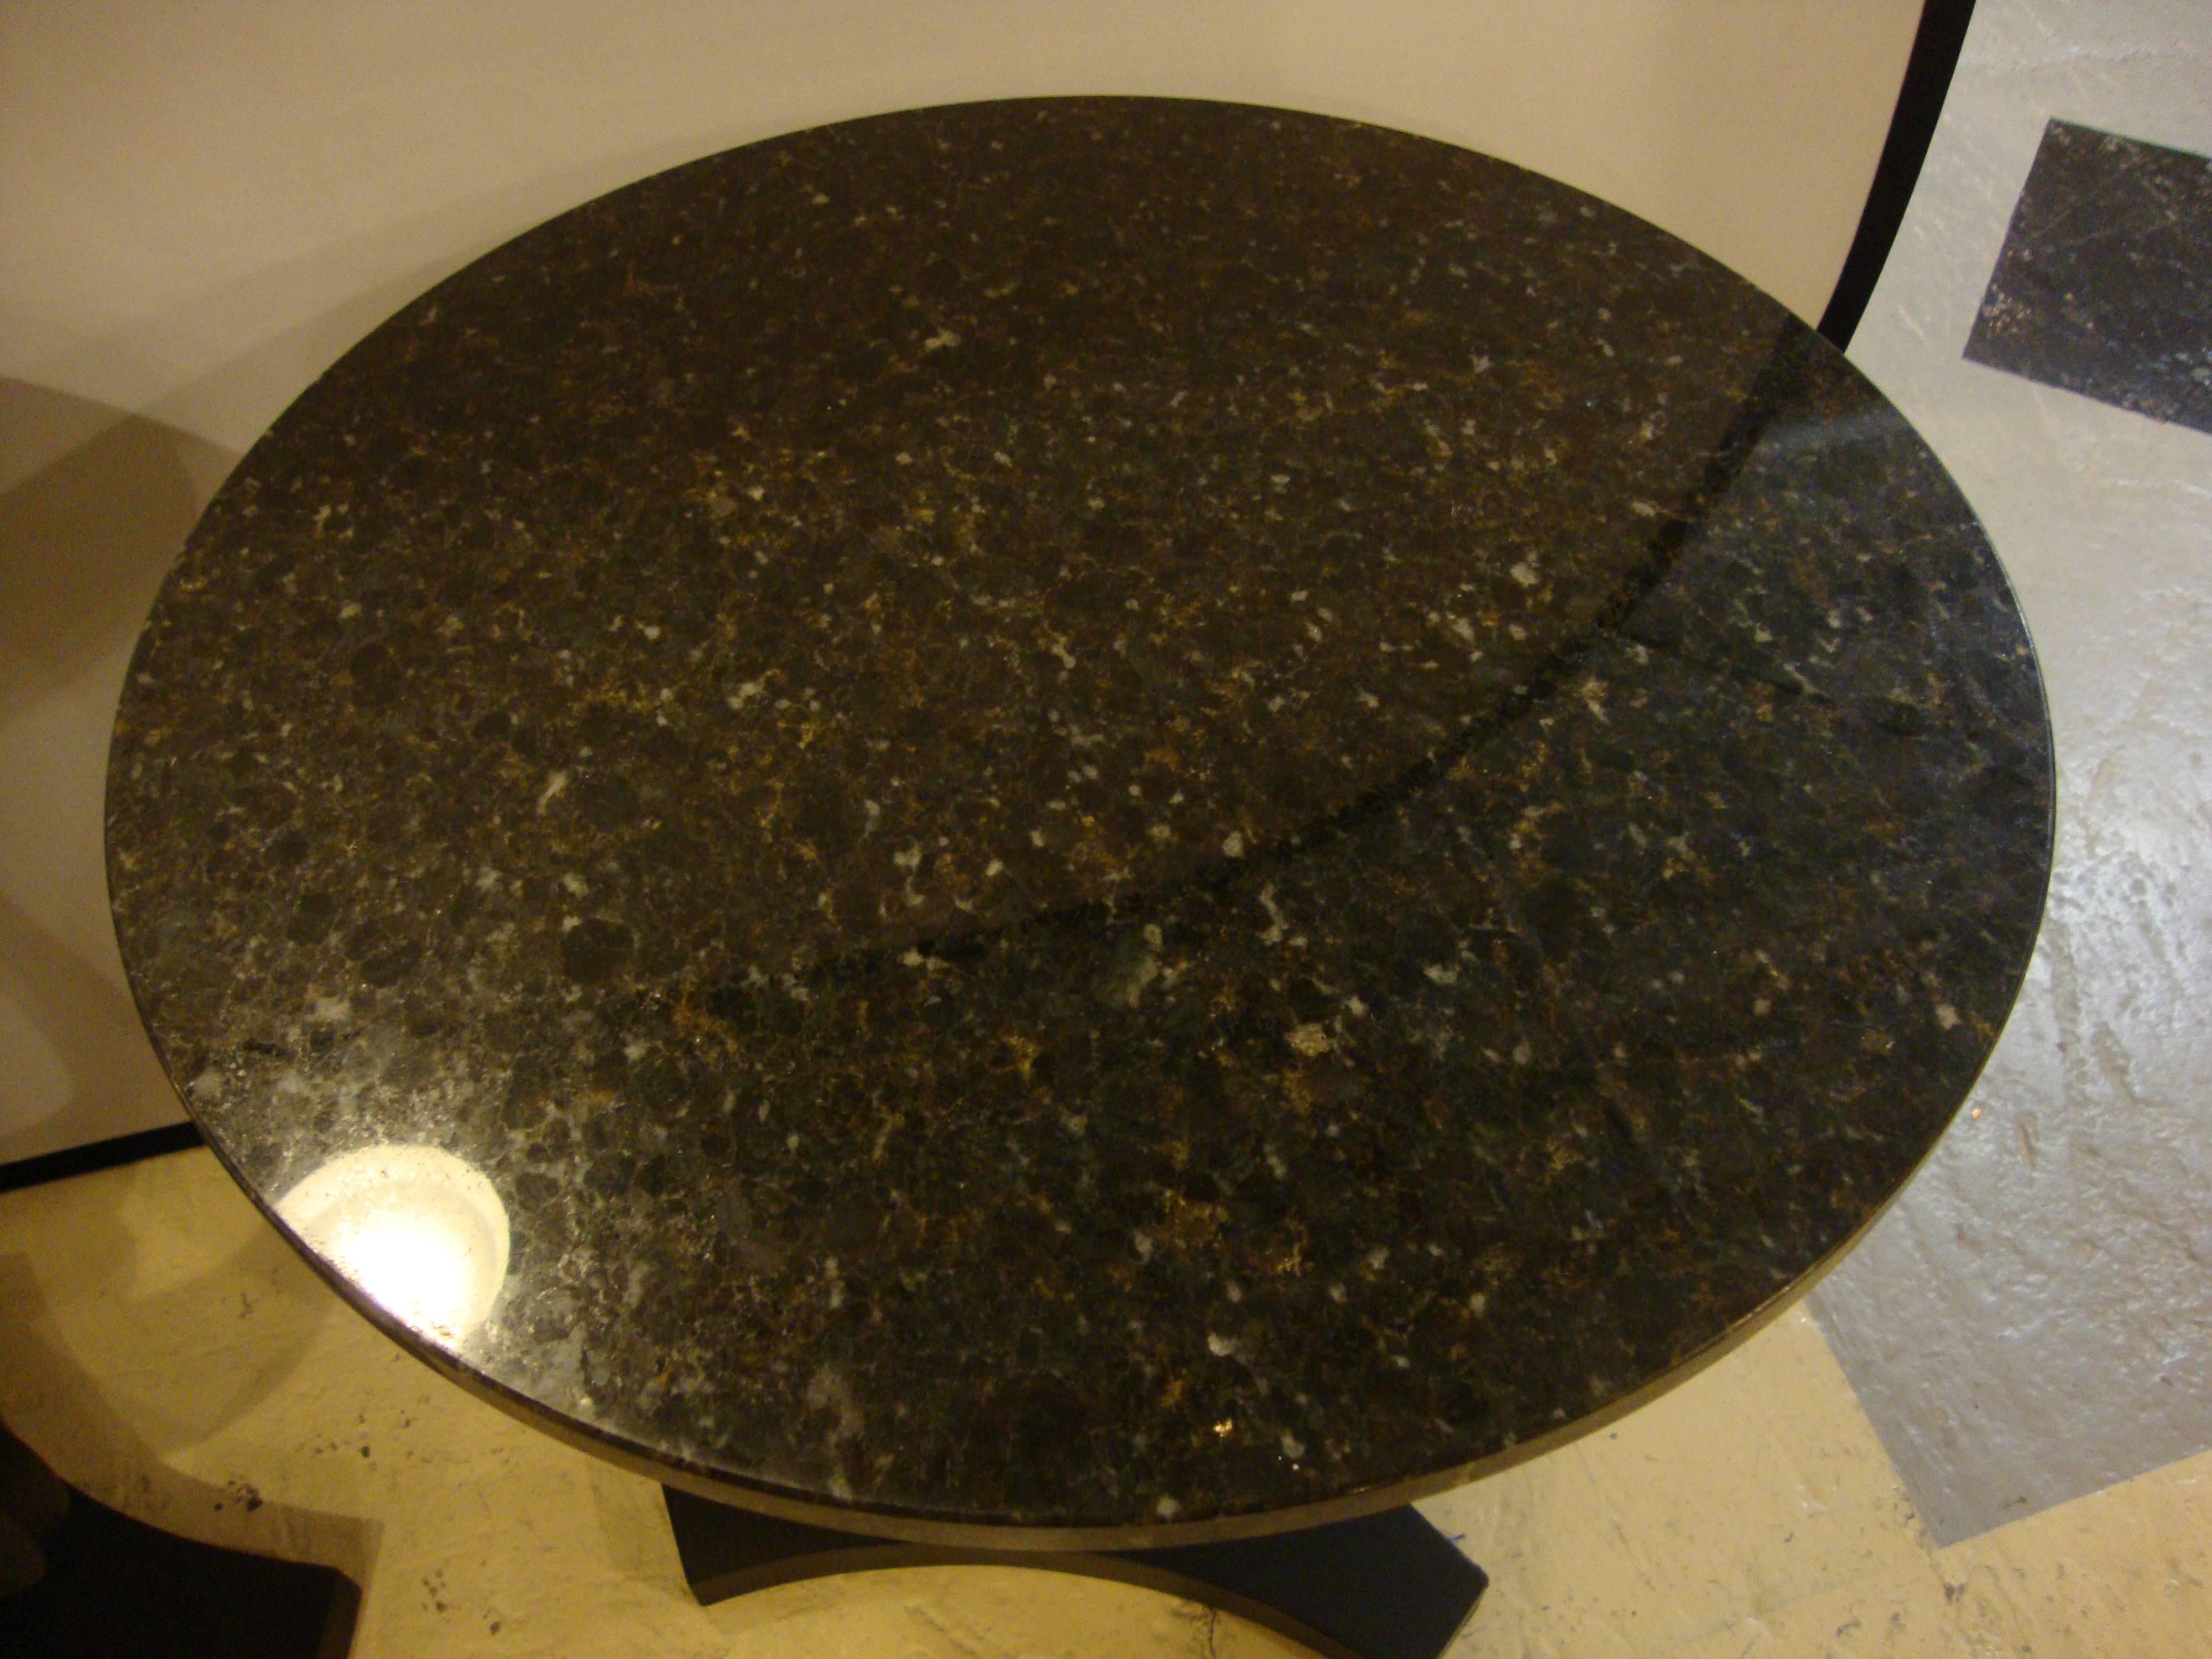 Pair of Art Deco Ebony Based End Tables with Black Marble Tops In Good Condition For Sale In Stamford, CT